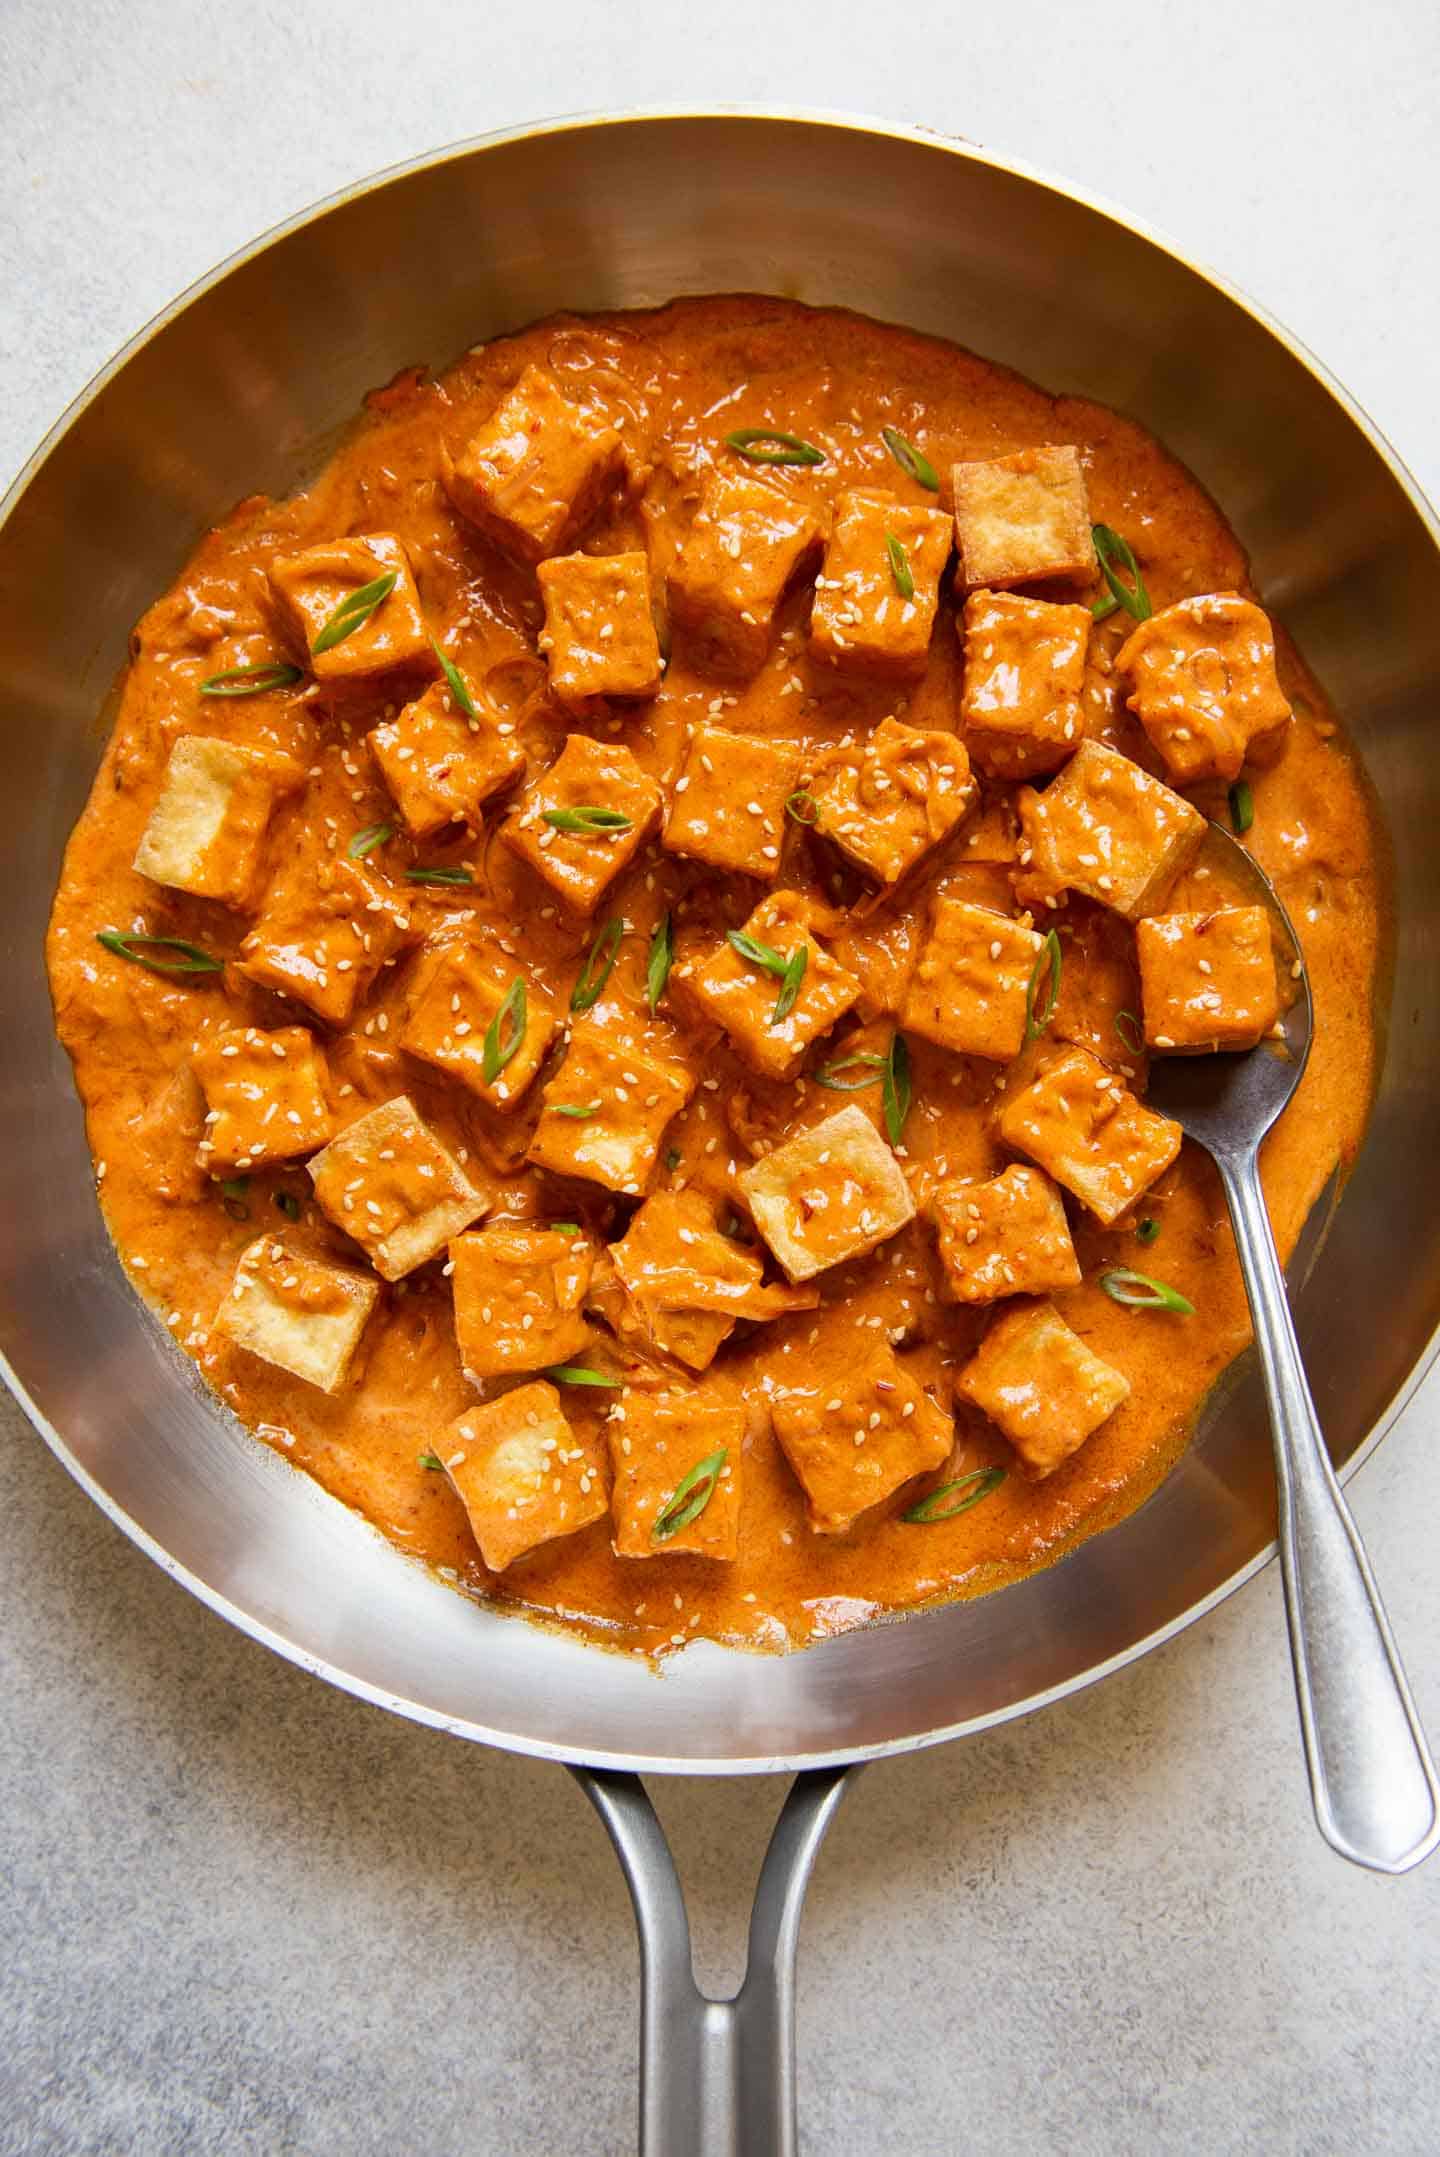 Spicy Tofu with Creamy Coconut Sauce